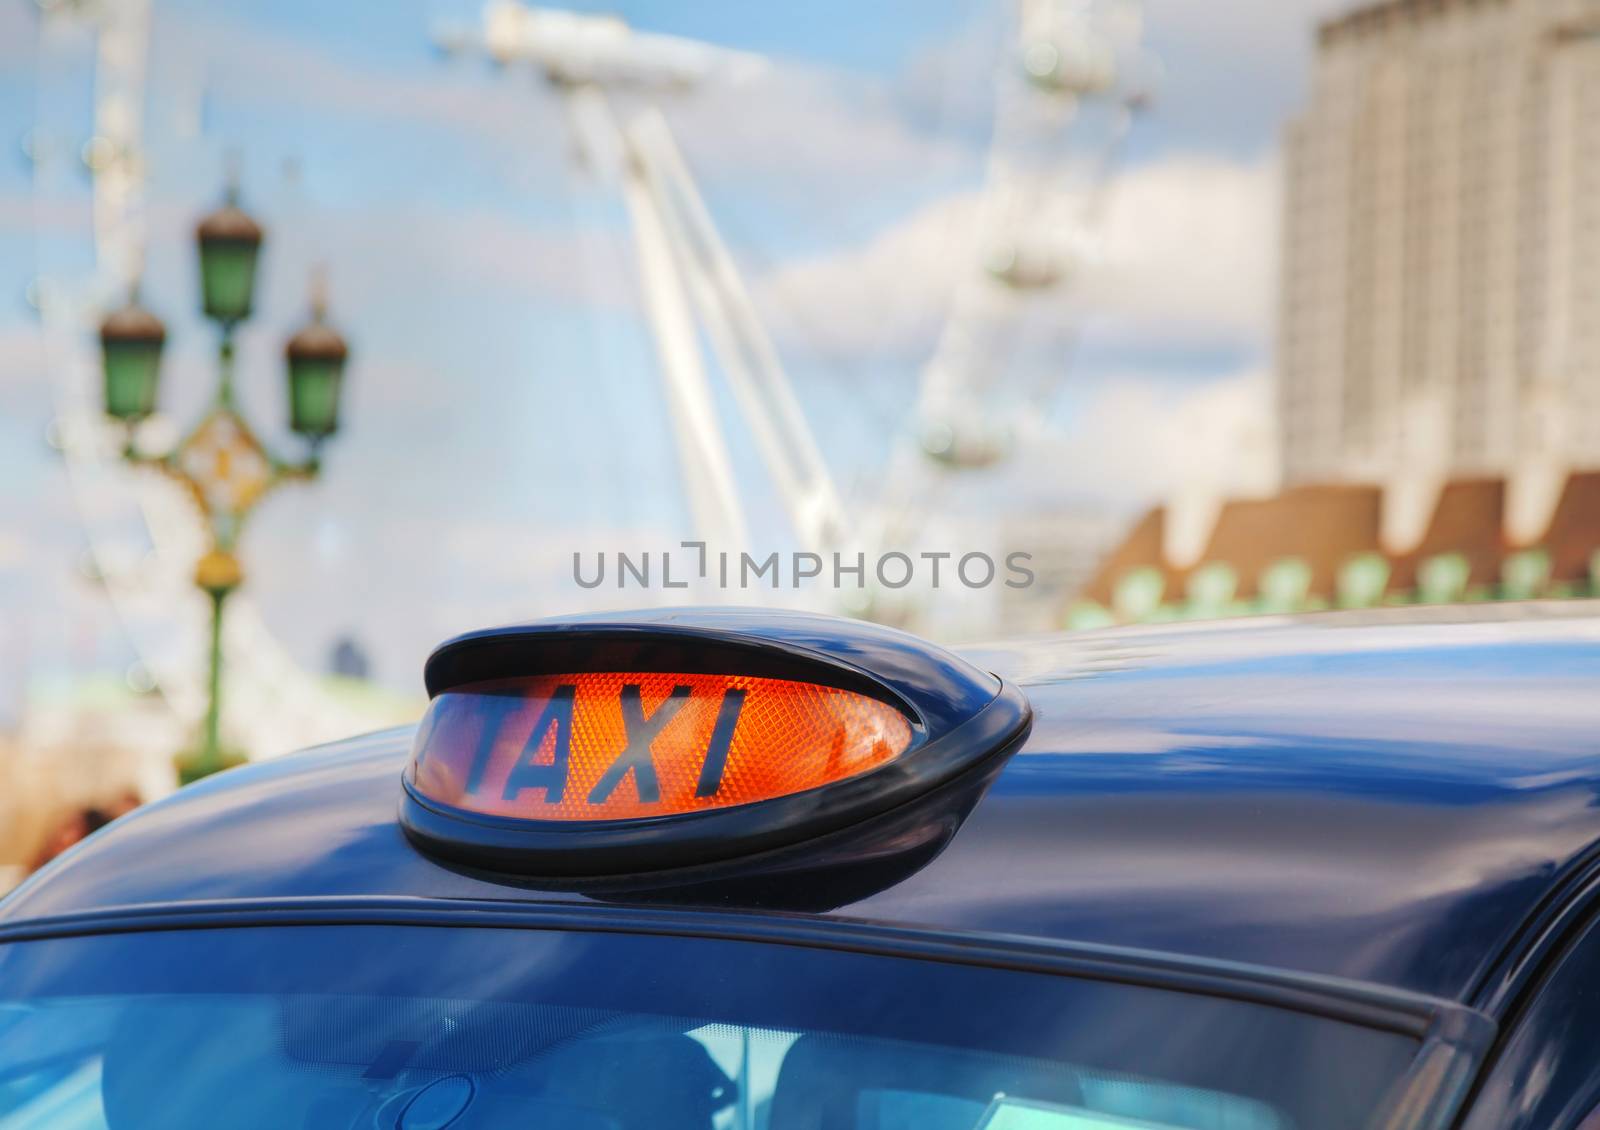 LONDON - APRIL 5: Famous taxi cab (hackney) an a street on April 5, 2015 in London, UK. A hackney or hackney carriage (a cab, black cab, hack or London taxi) is a carriage or automobile for hire.